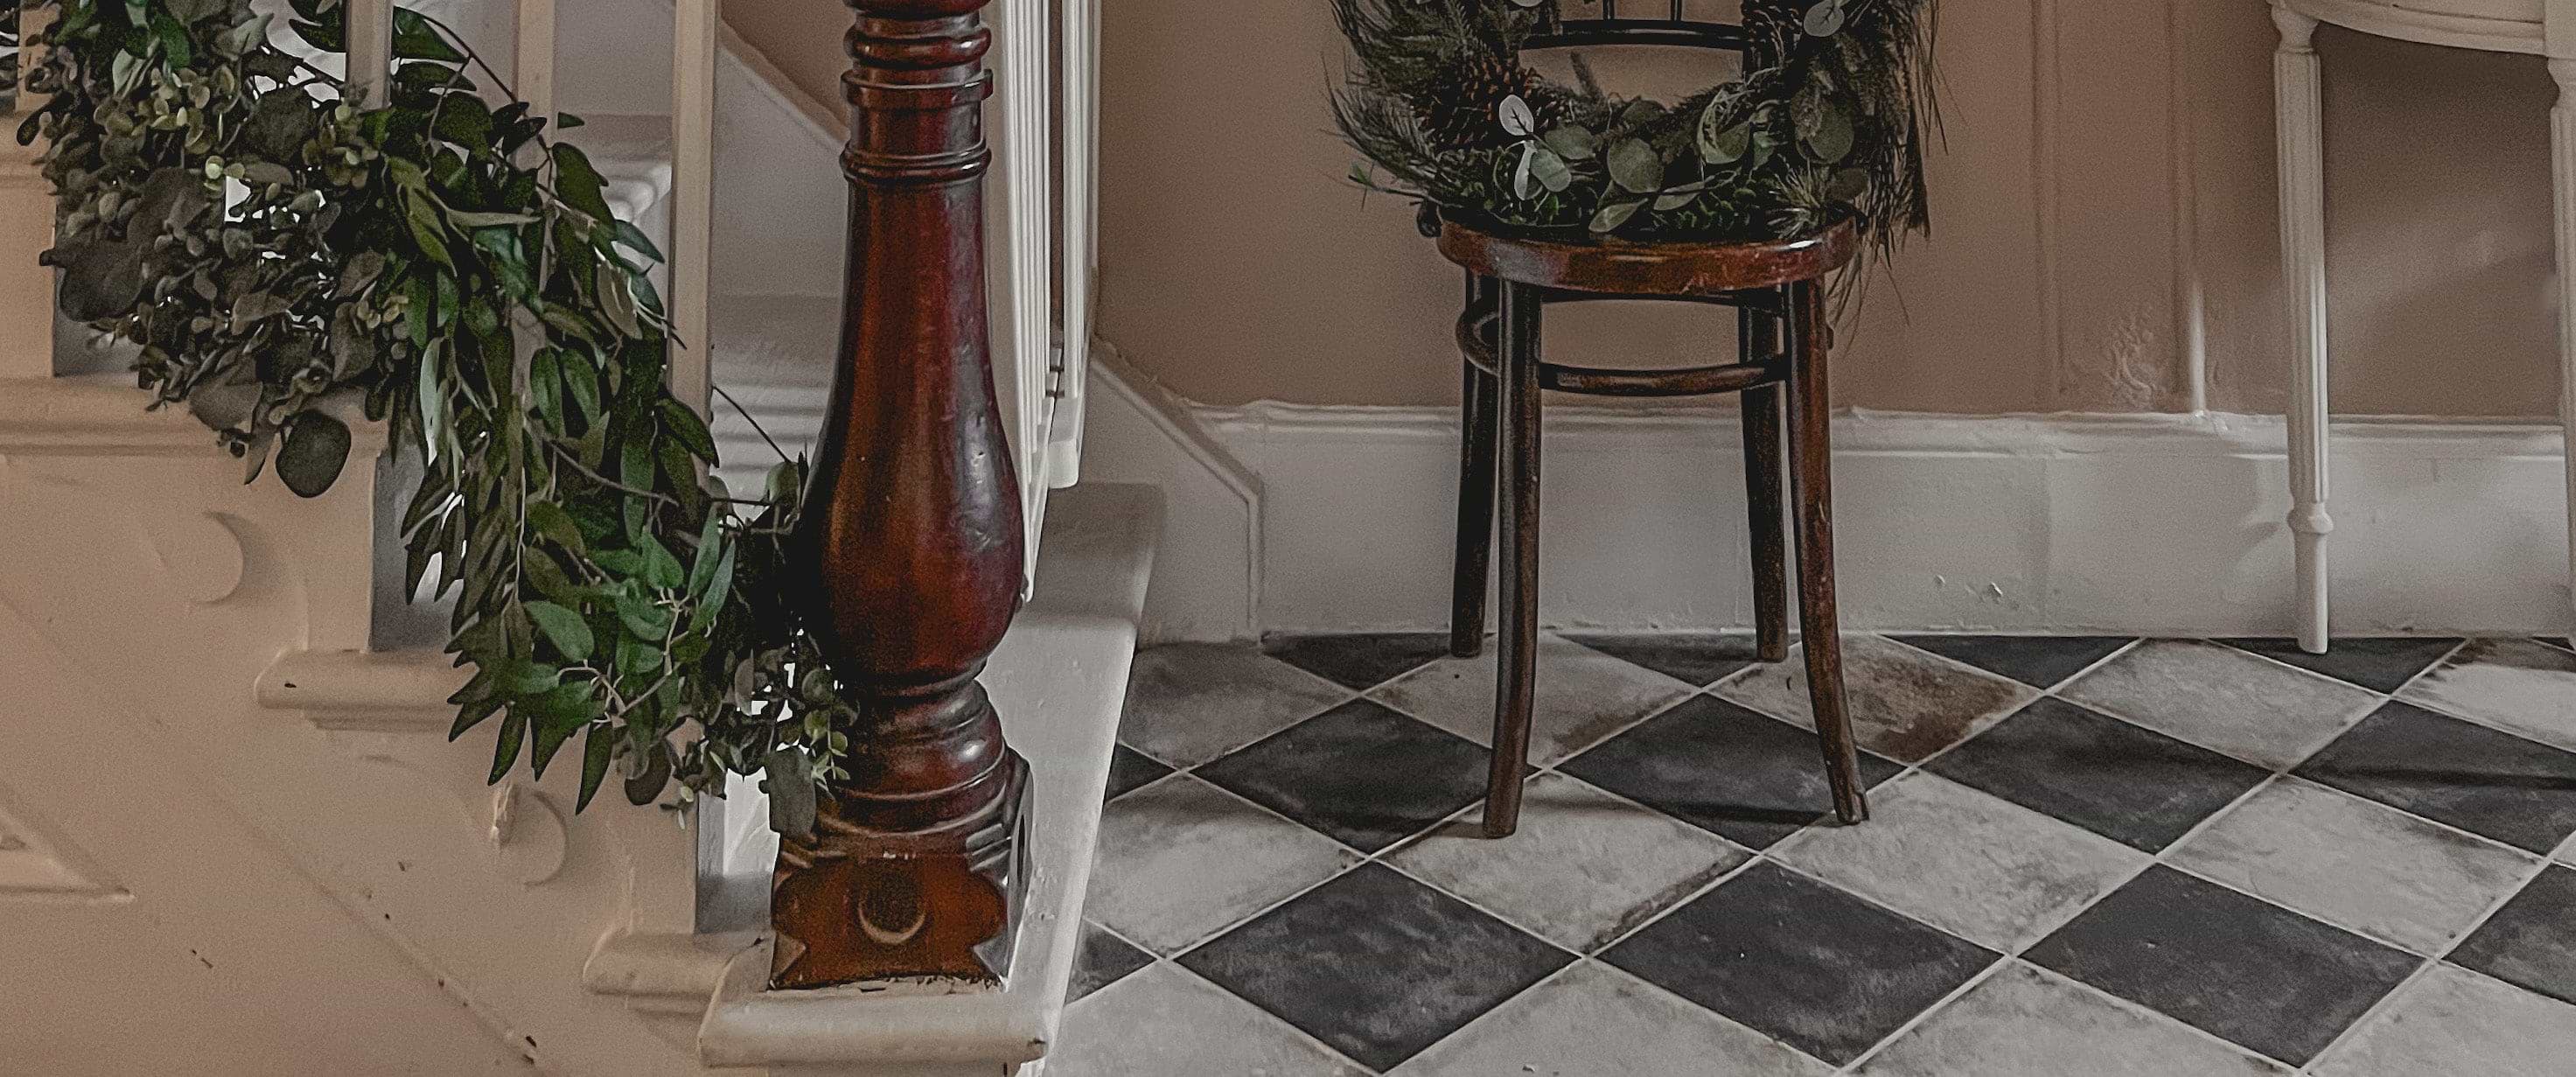 Ca' Pietra tiles stocked by Hyperion Tiles in hall makeover